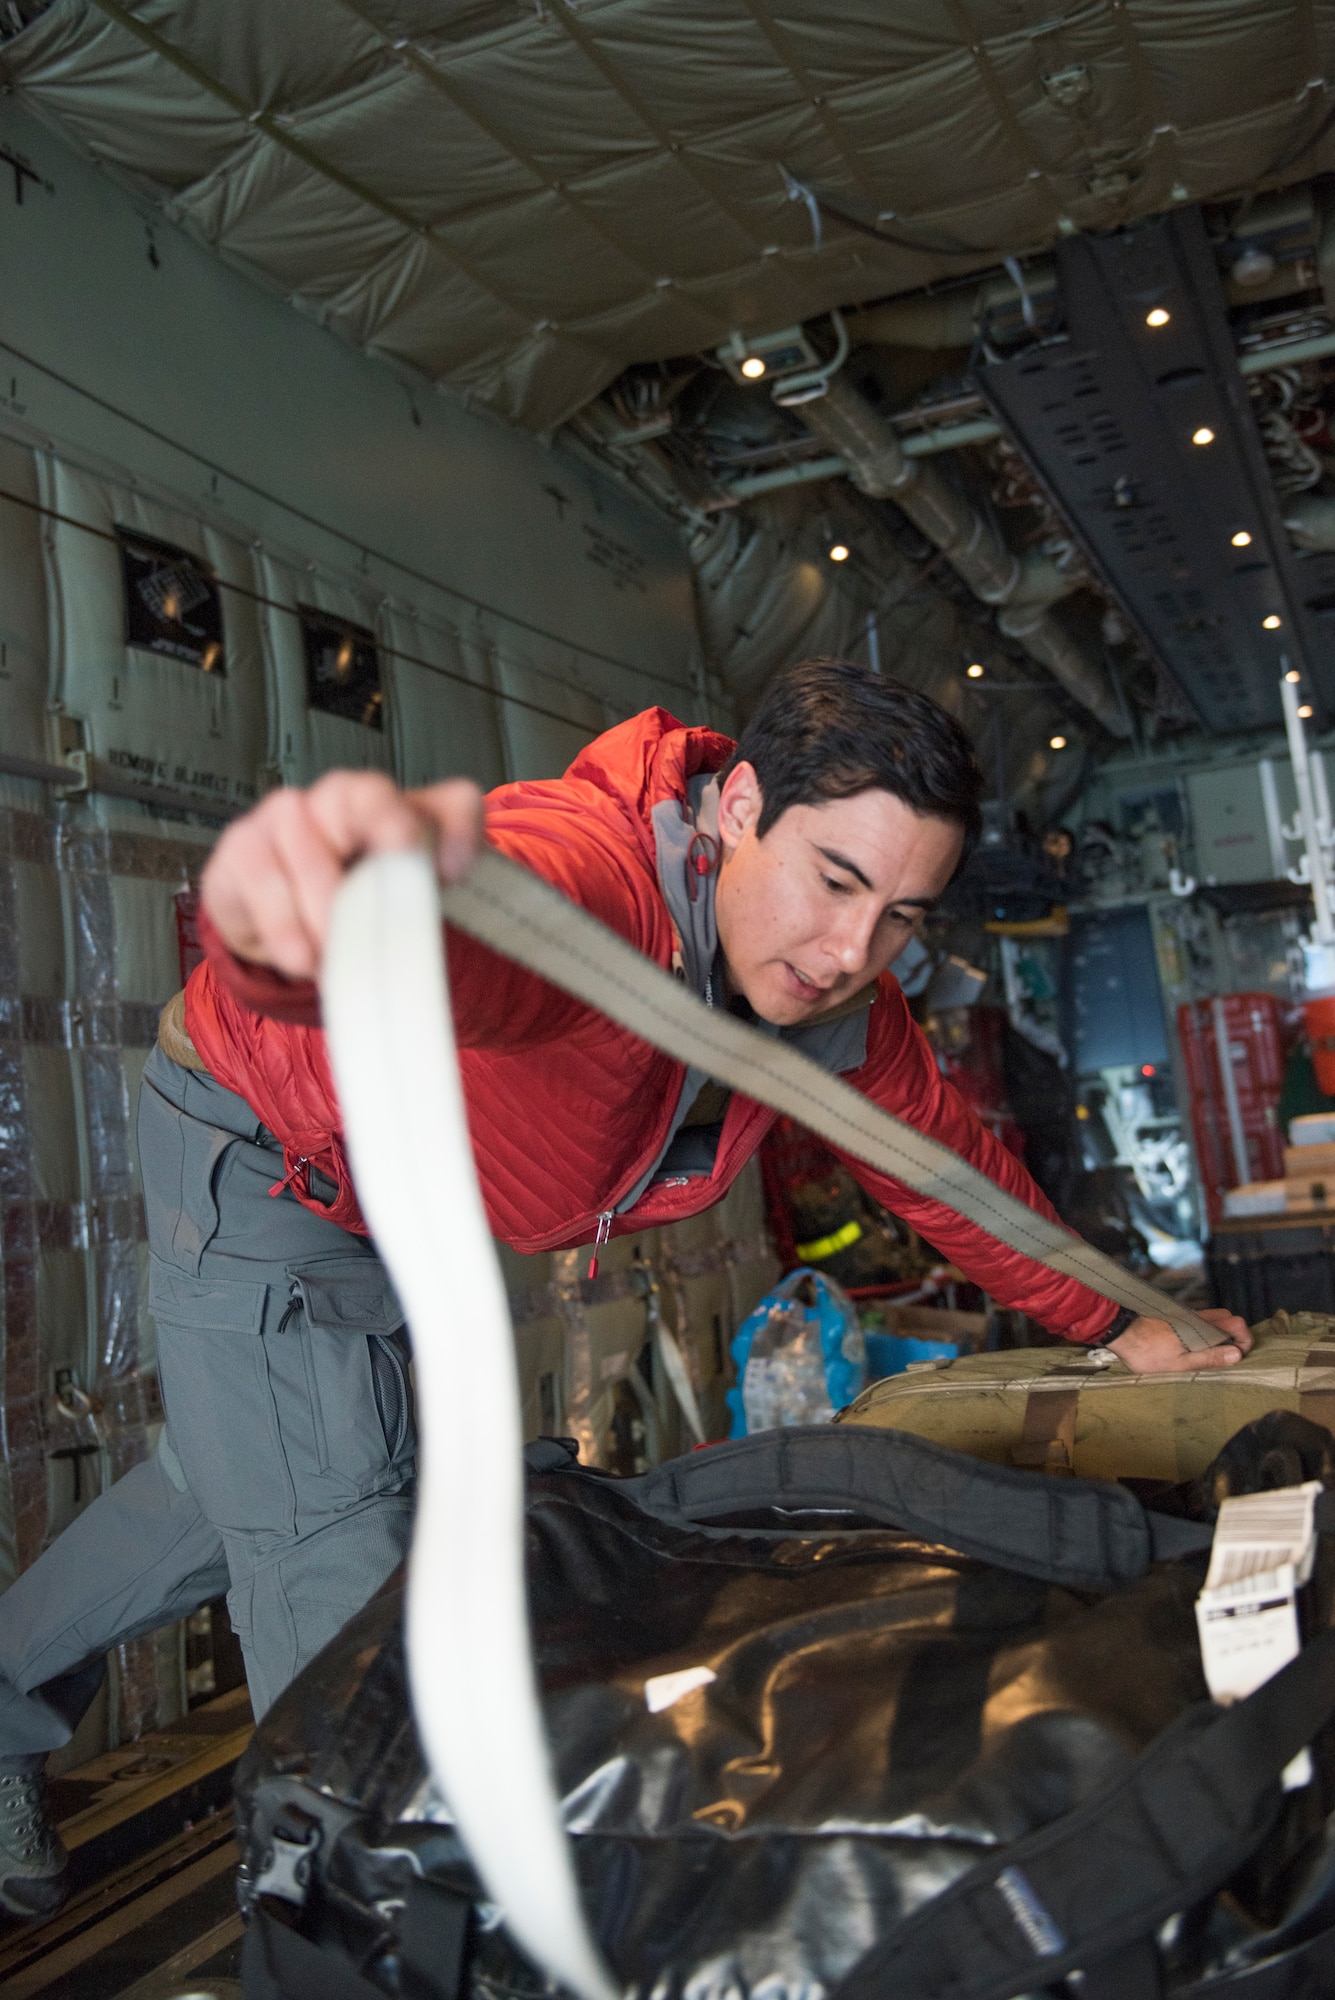 A pararescueman with the 212th Rescue Squadron secures mission-essential cargo on a C-130J "Combat King II" at Joint Base Elmendorf-Richardson, Alaska, for an aerial damage assessment Nov. 30, 2018. In a matter of hours, members of the Alaska Air National Guard's Maintenance and Operation groups turned a planned community engagement into an aerial survey of earthquake damage in Southcentral Alaska, reporting findings to the State of Alaska's Joint Operations Center.